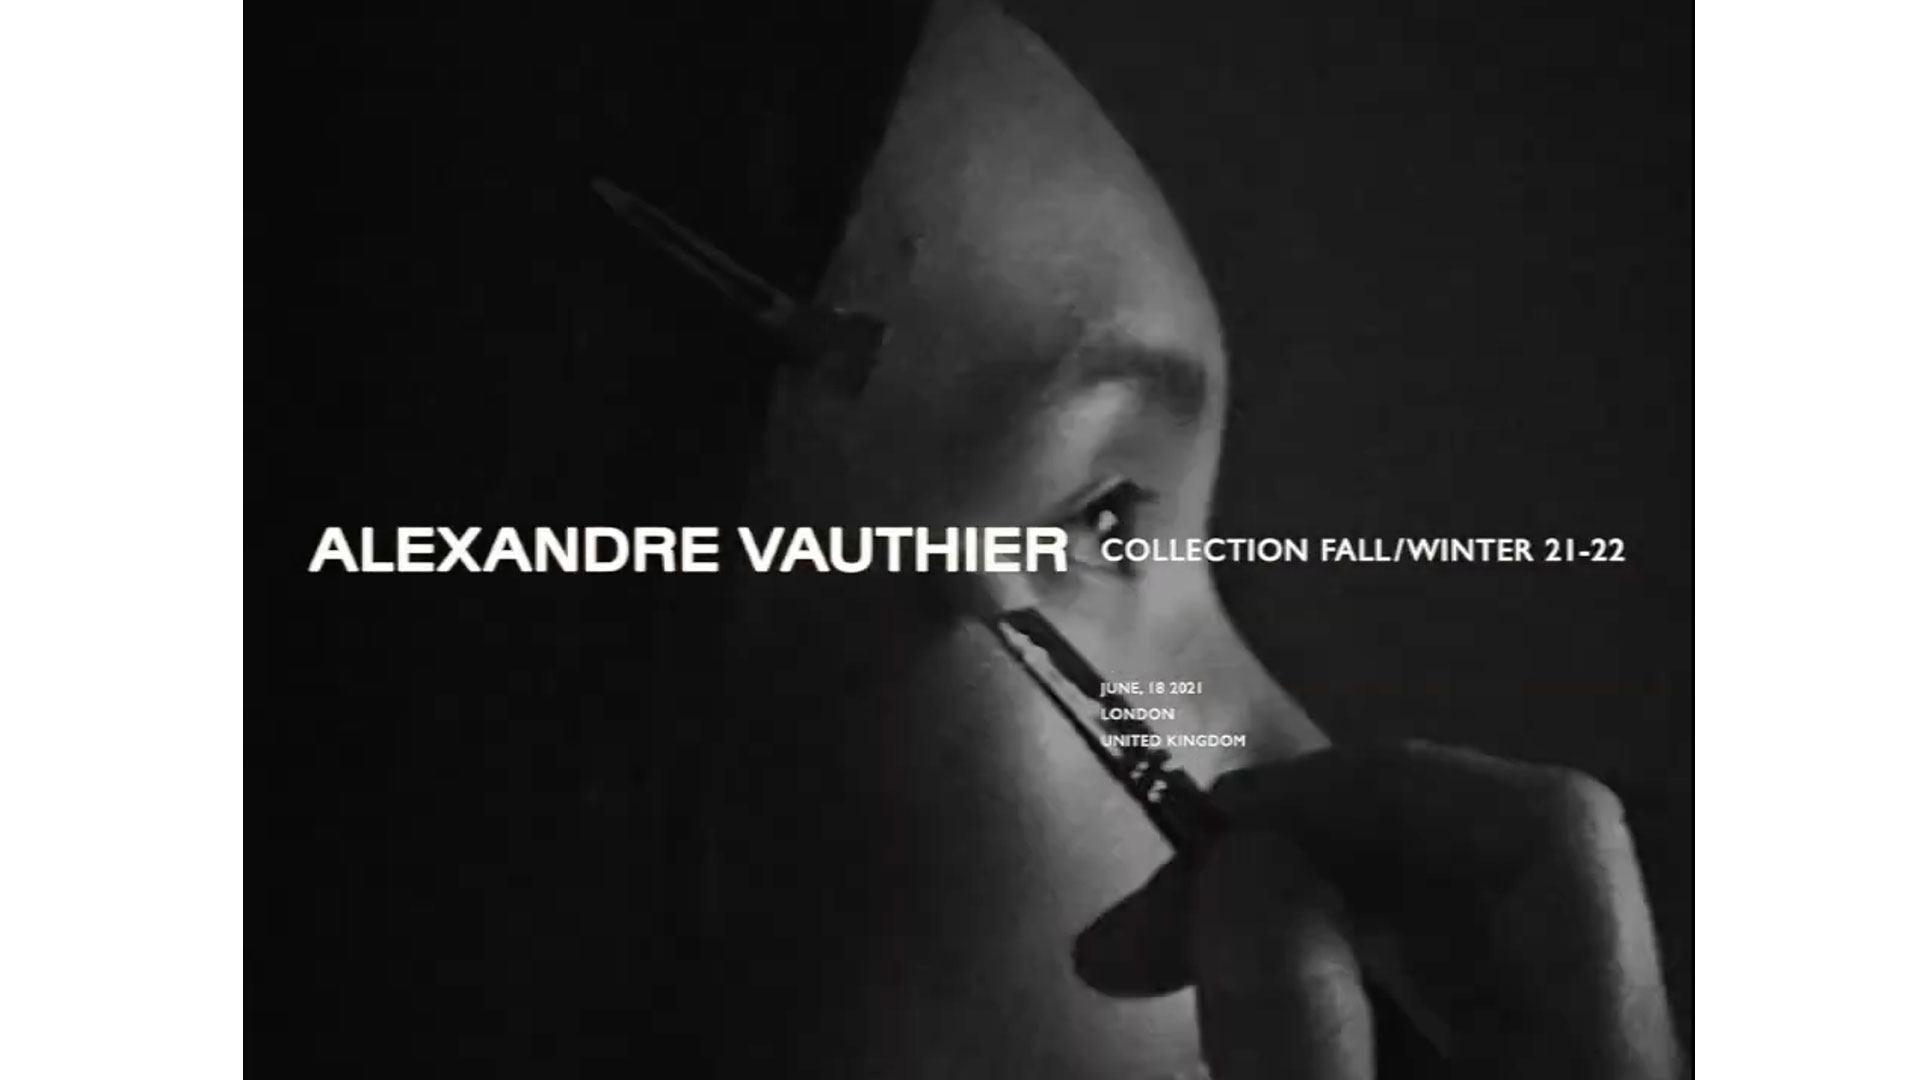 ALEXANDER VAUTHIER HAUTE COUTURE FALL-WINTER 2021-2022 COLLECTION